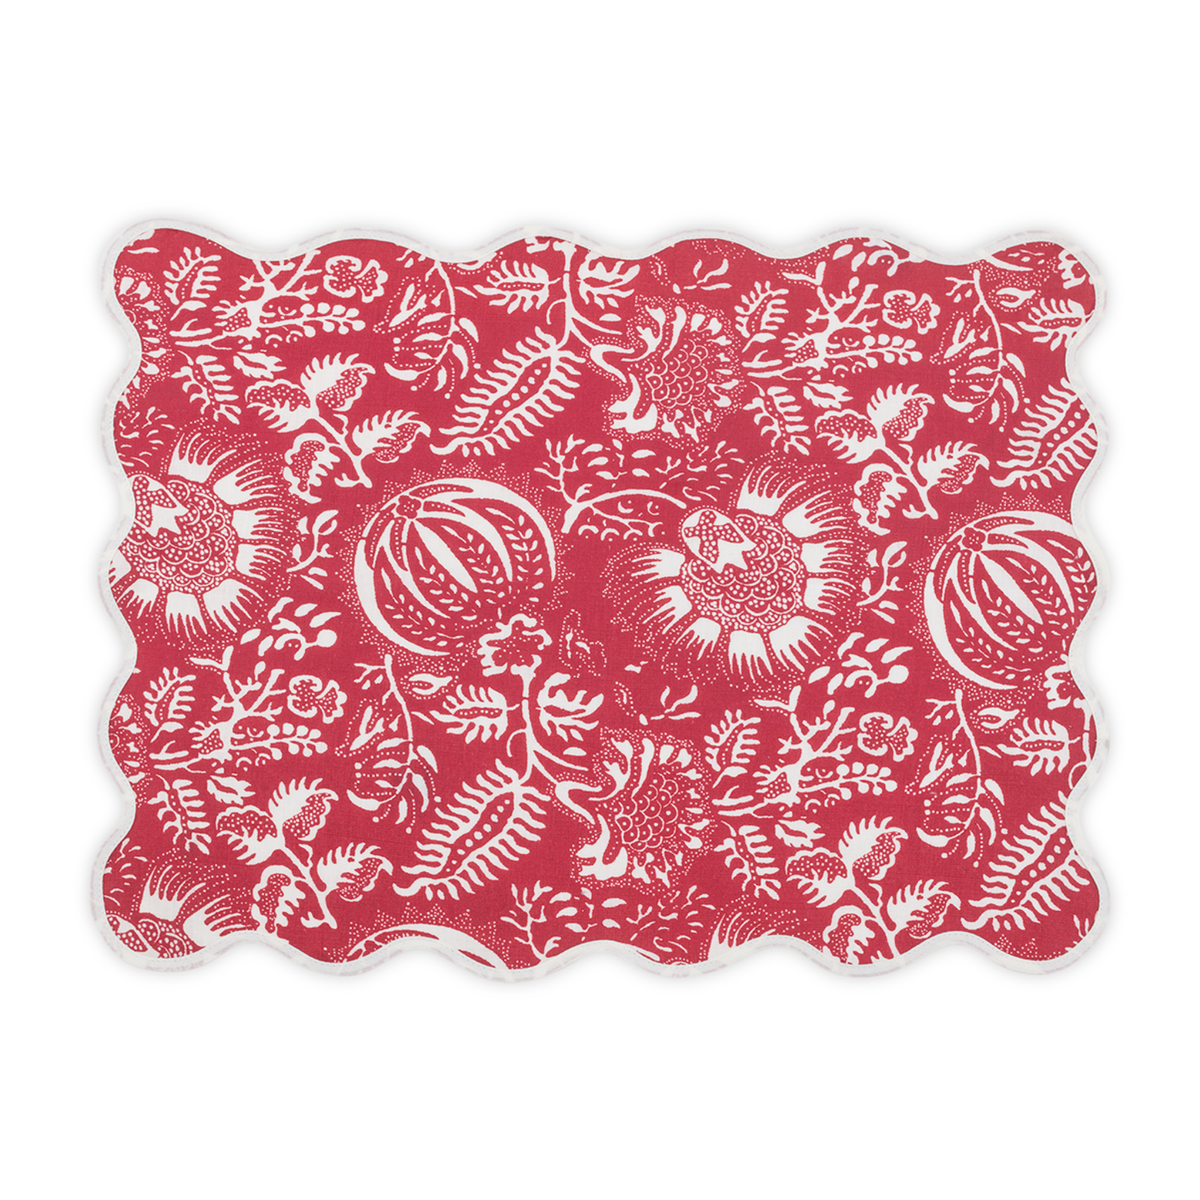 Silo Image of Matouk Granada Table Placemat in Scarlet Color